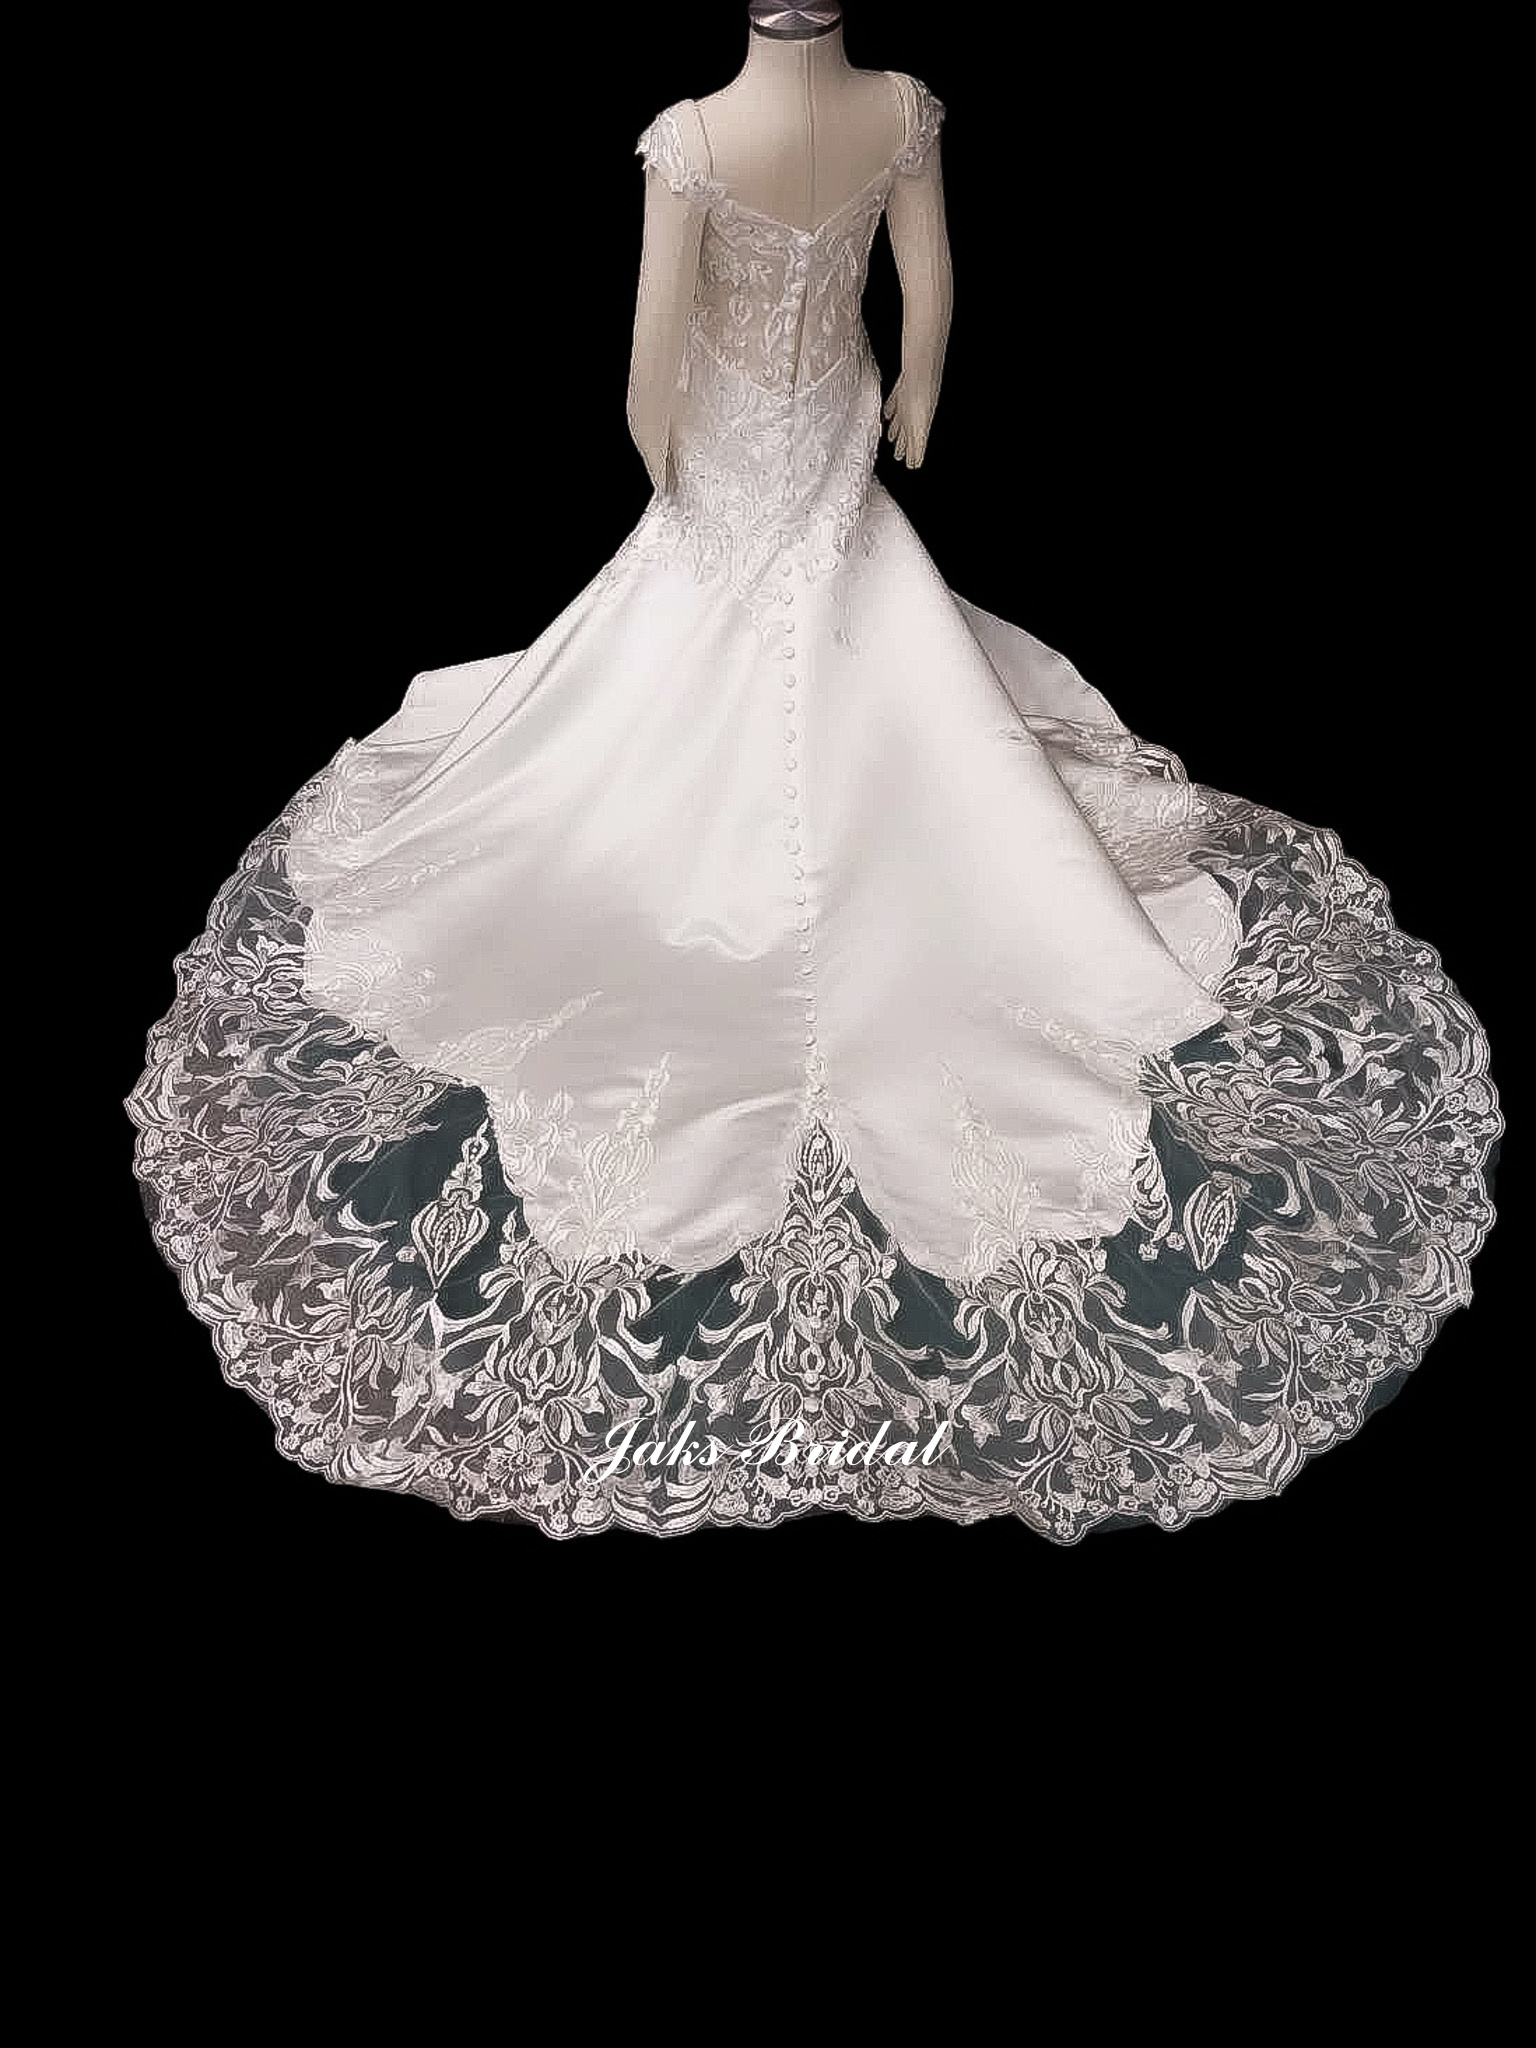 This mermaid dress has a plunging neckline with an illusion lace back. The cathedral train is adorned with lace appliques that match the bodice.